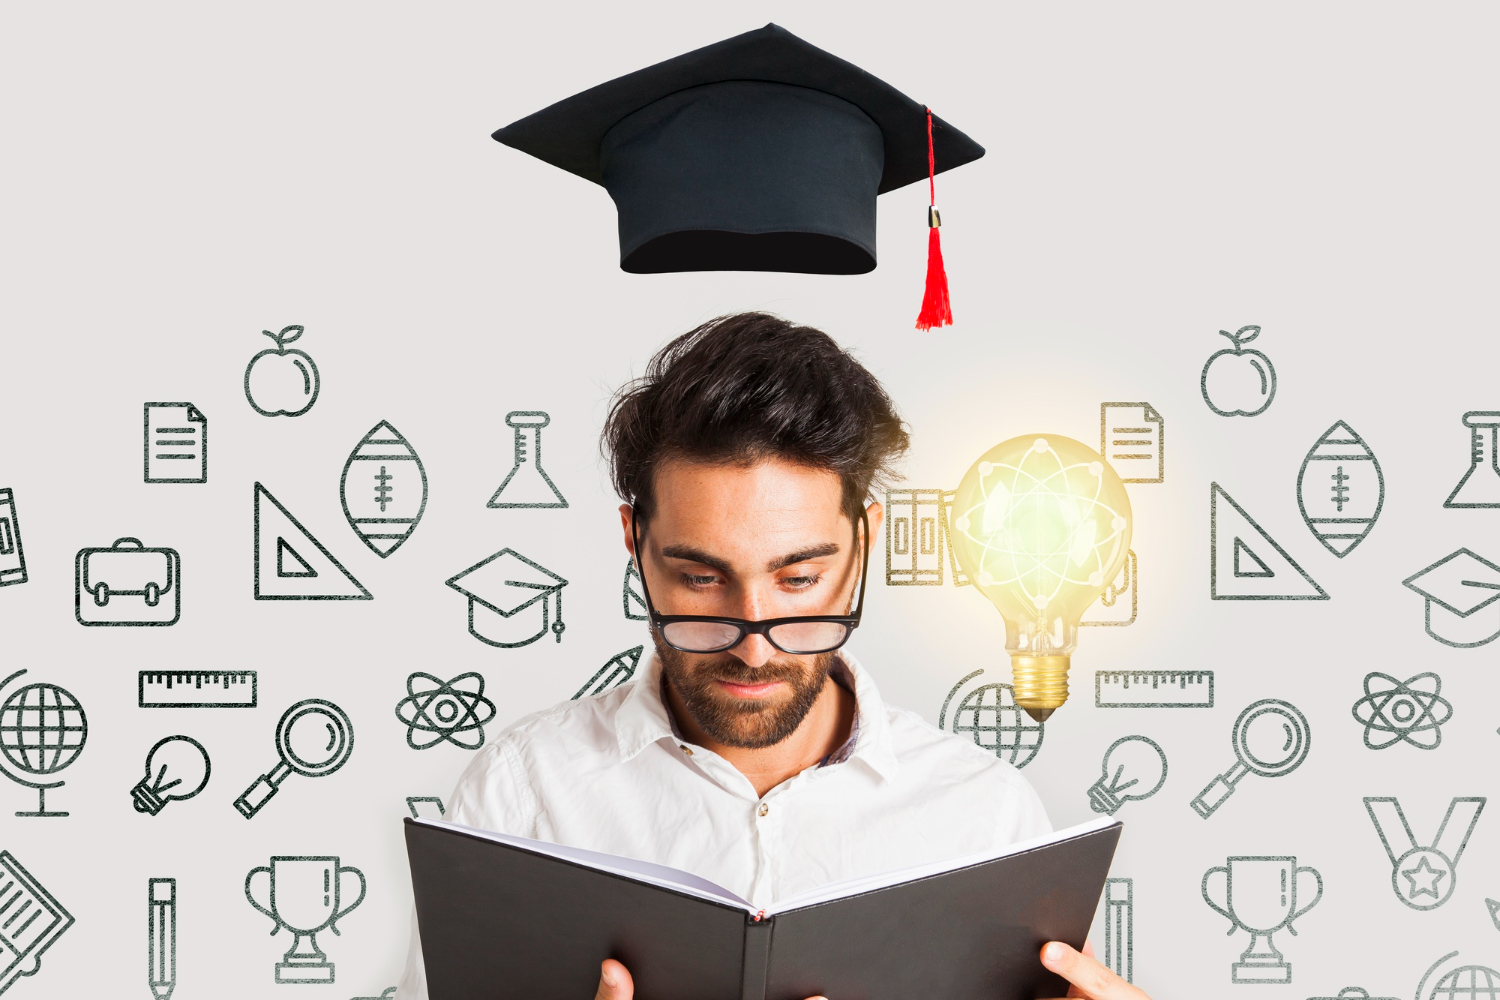 Apply Educational Marketing Strategies to Increase Your Institution's Growth